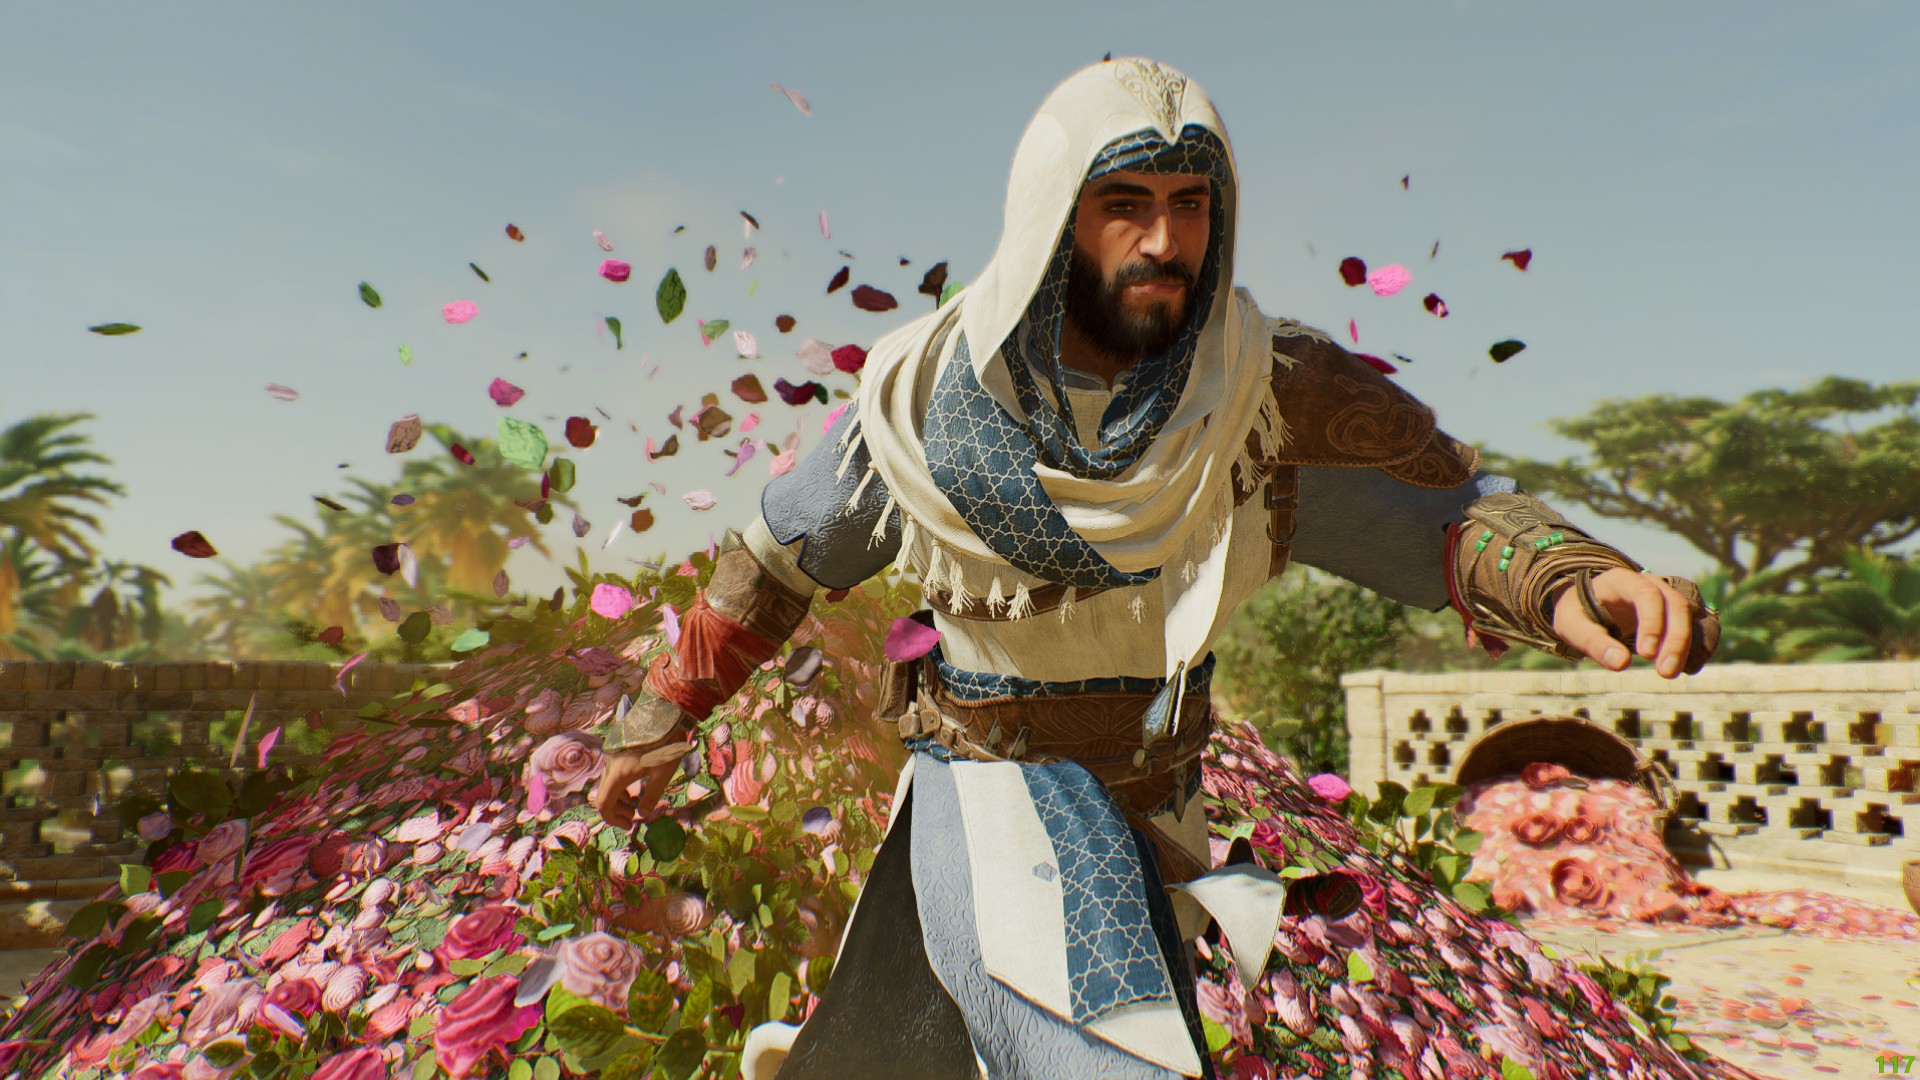 Assassin's Creed Mirage Review (PS5)